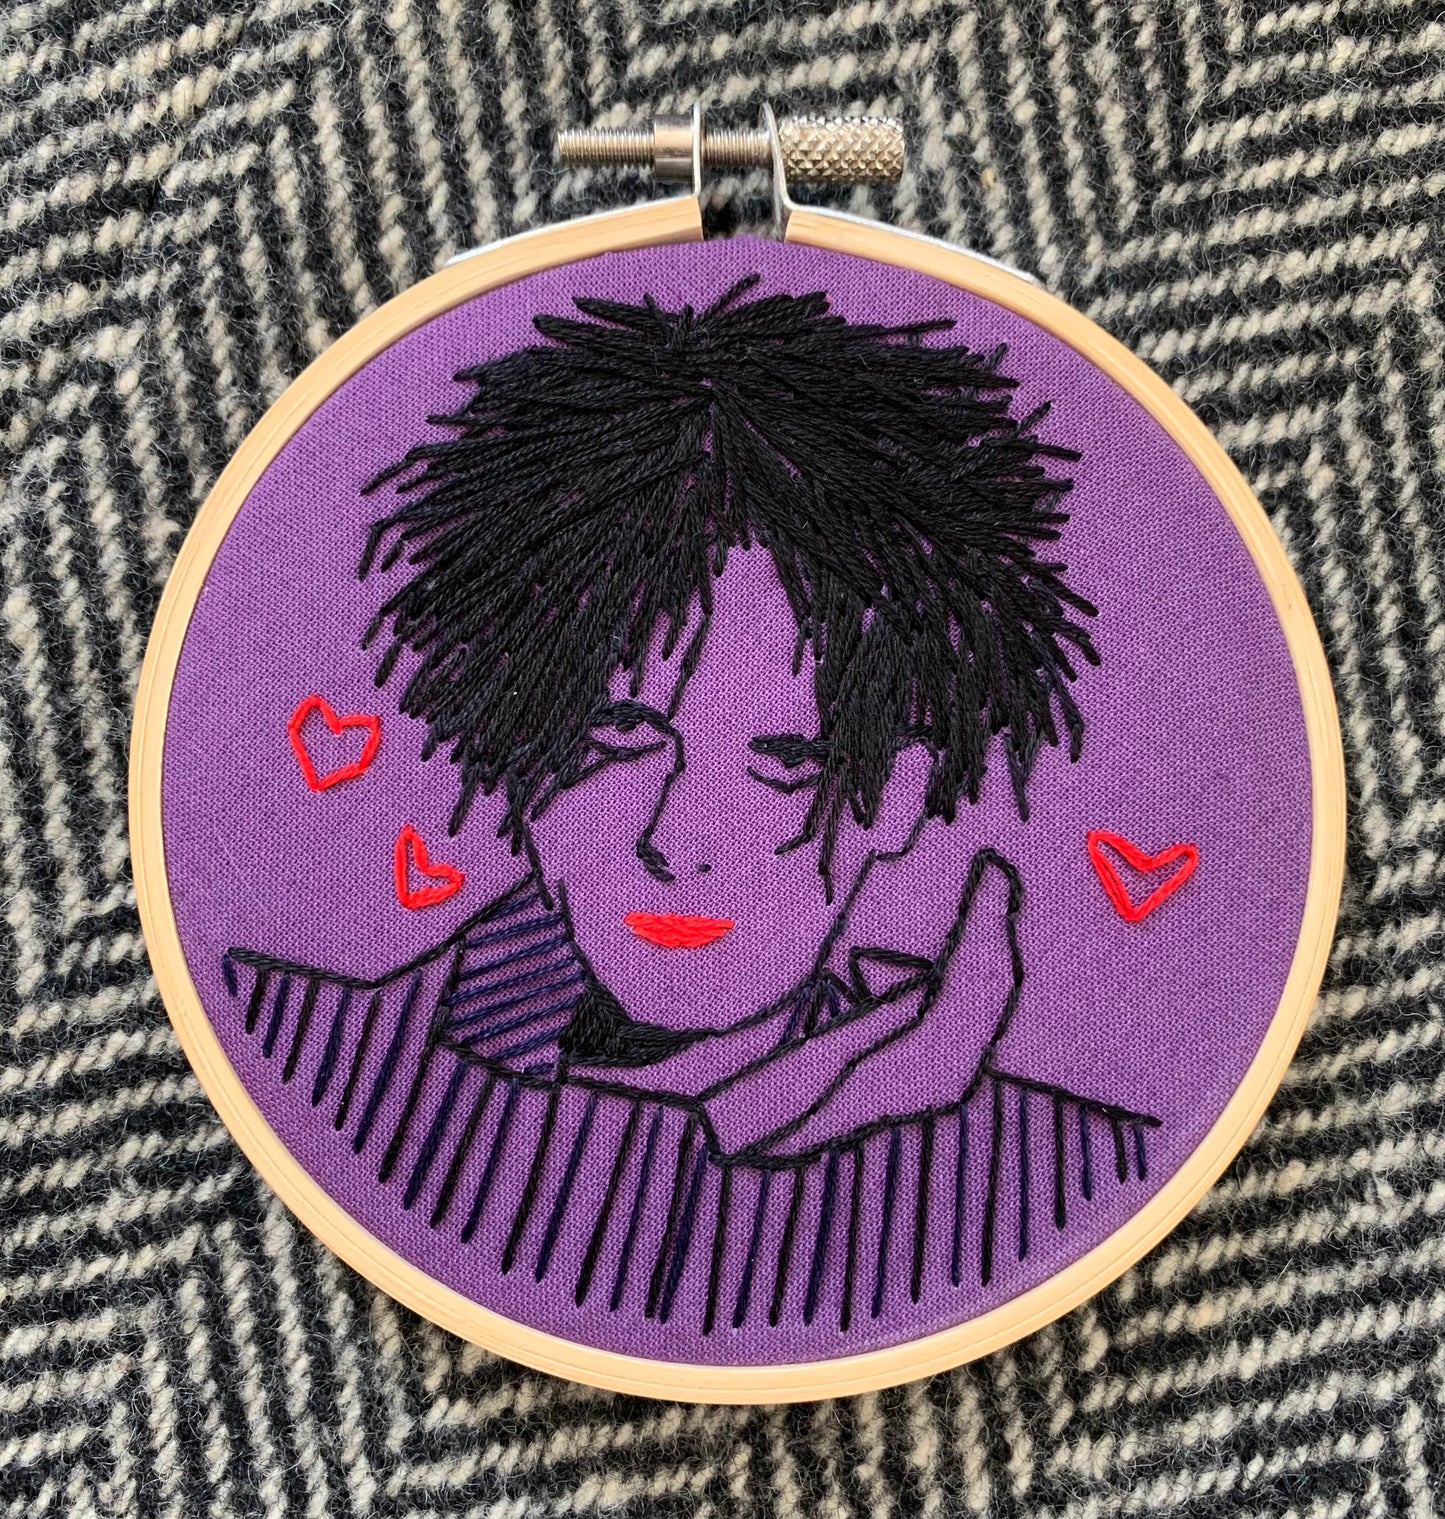 Embroidery Hoop Wall Art - The Cure Bloodflowers, Robert Smith, Cold Cave